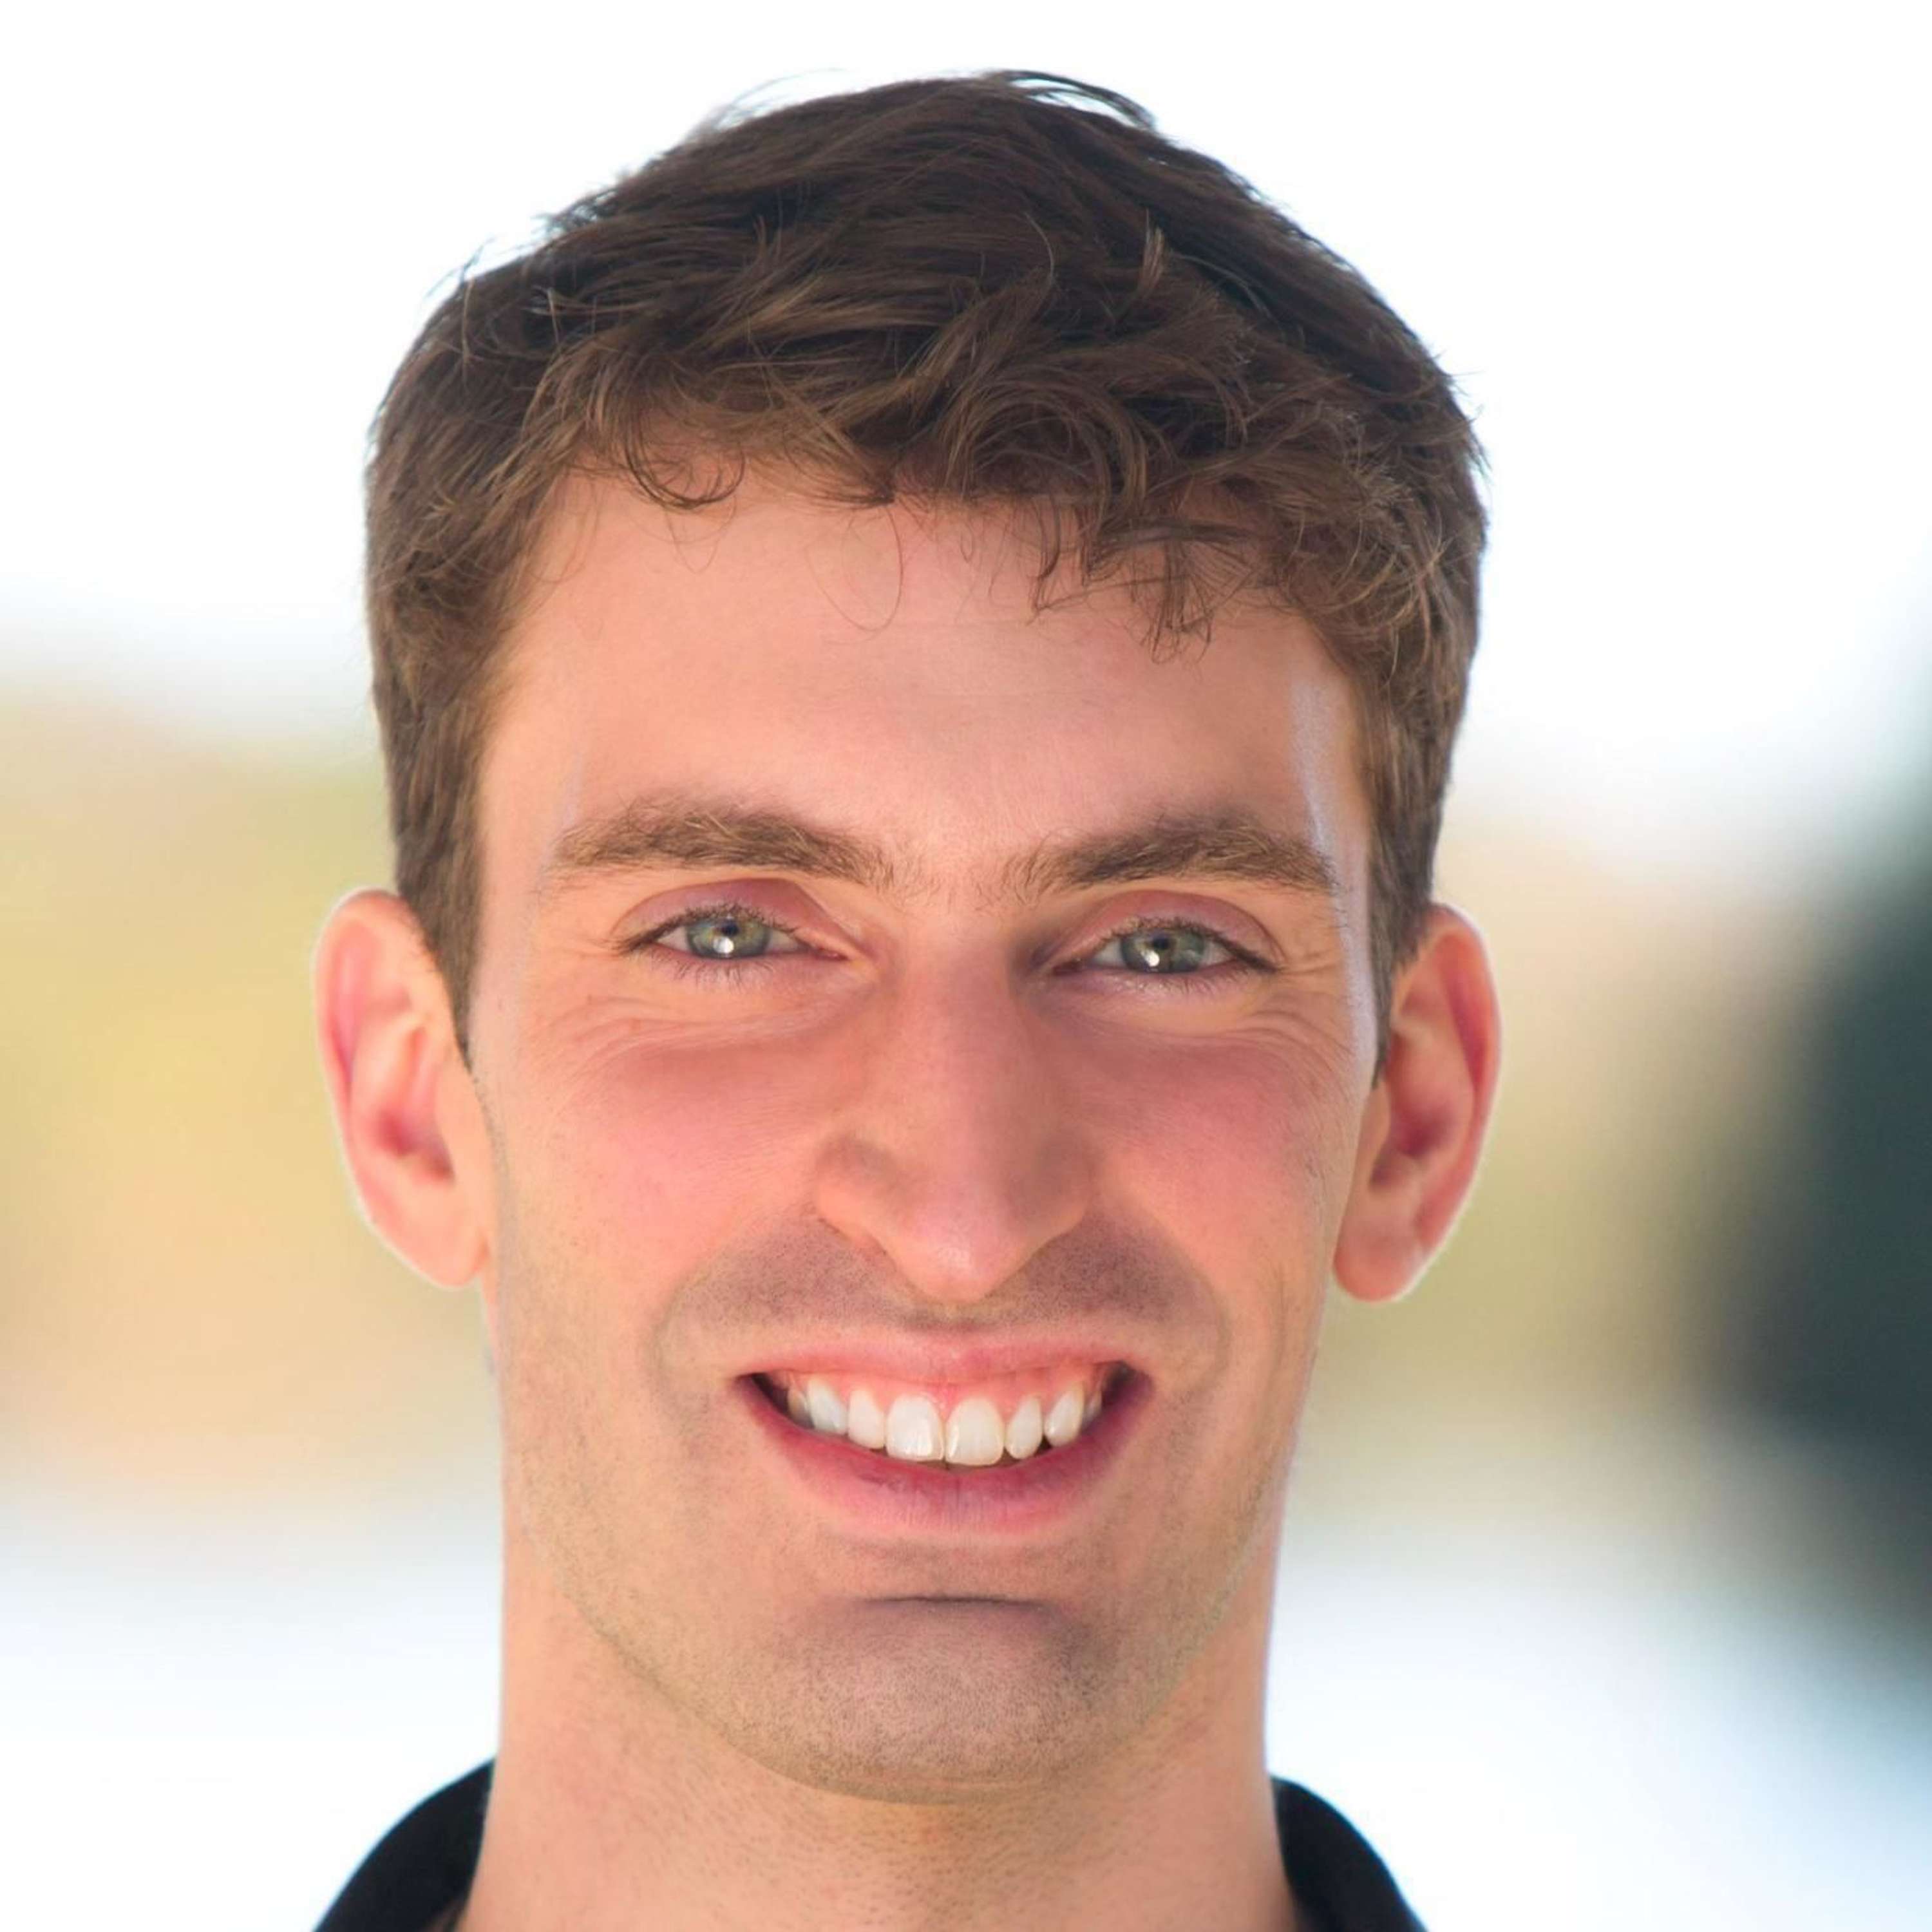 5: Ryan Singer - Jobs-to-be-Done and Product Design